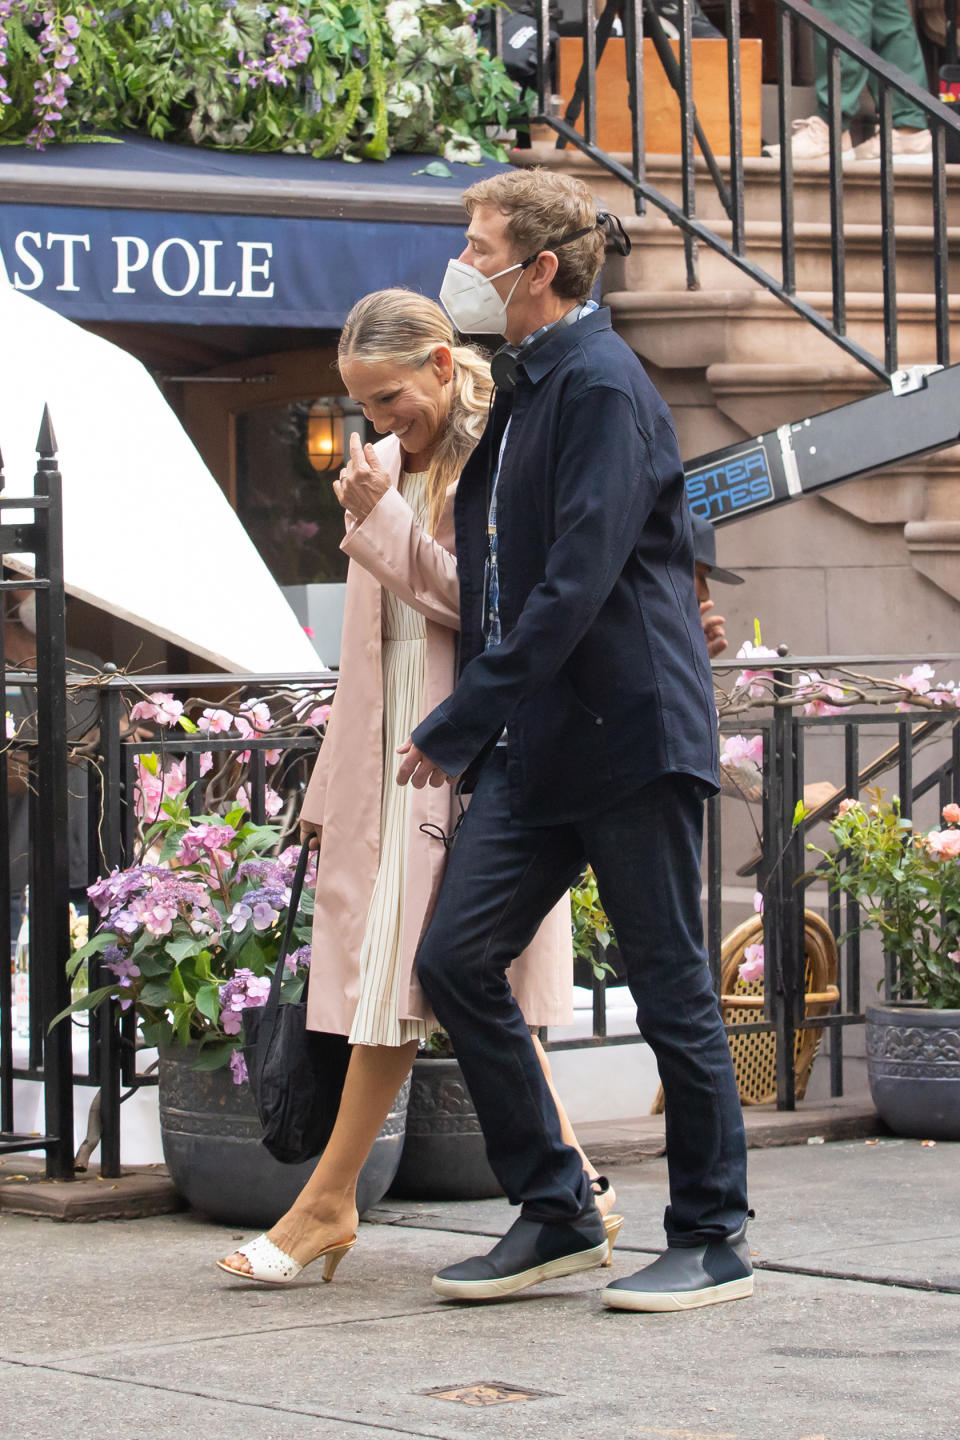 Sarah Jessica Parker fims “And Just Like That…” in New York City’s Upper East Side on July 12, 2021. - Credit: RCF / MEGA